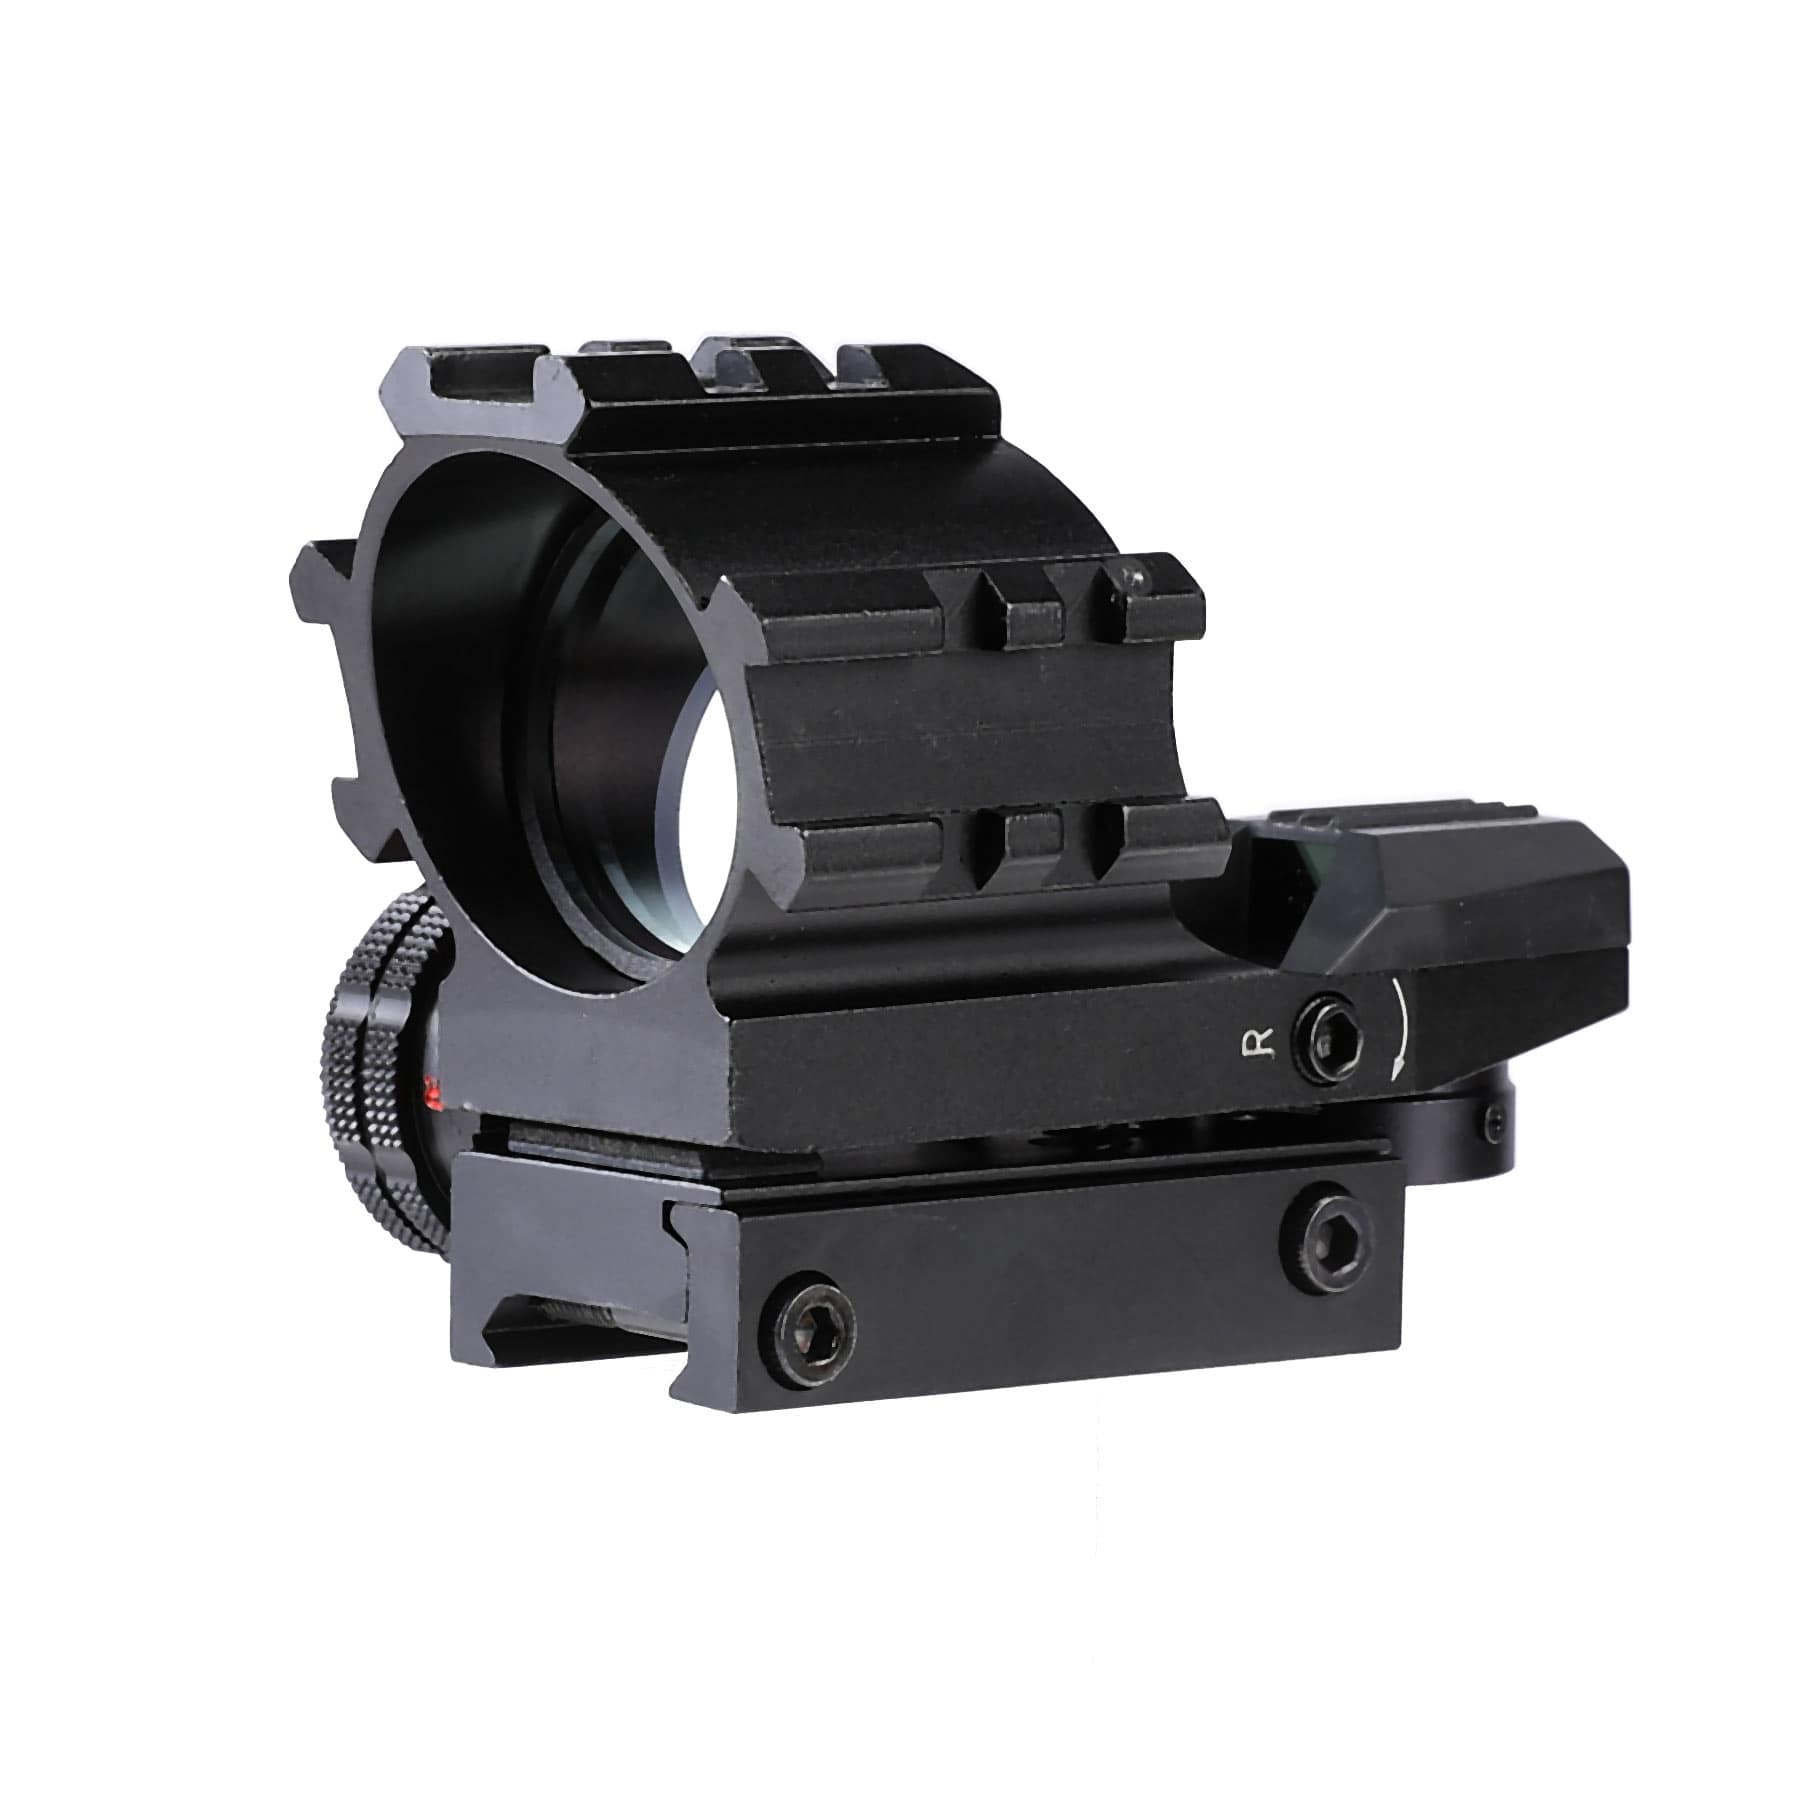 red-dot-sight-rifle-scope-vortex-scope-night-vision-scope-air-rifle-red-dot-holosun-magpul-rifle-scopes-tactical-ar---15-accessories-scope-thermal-scope